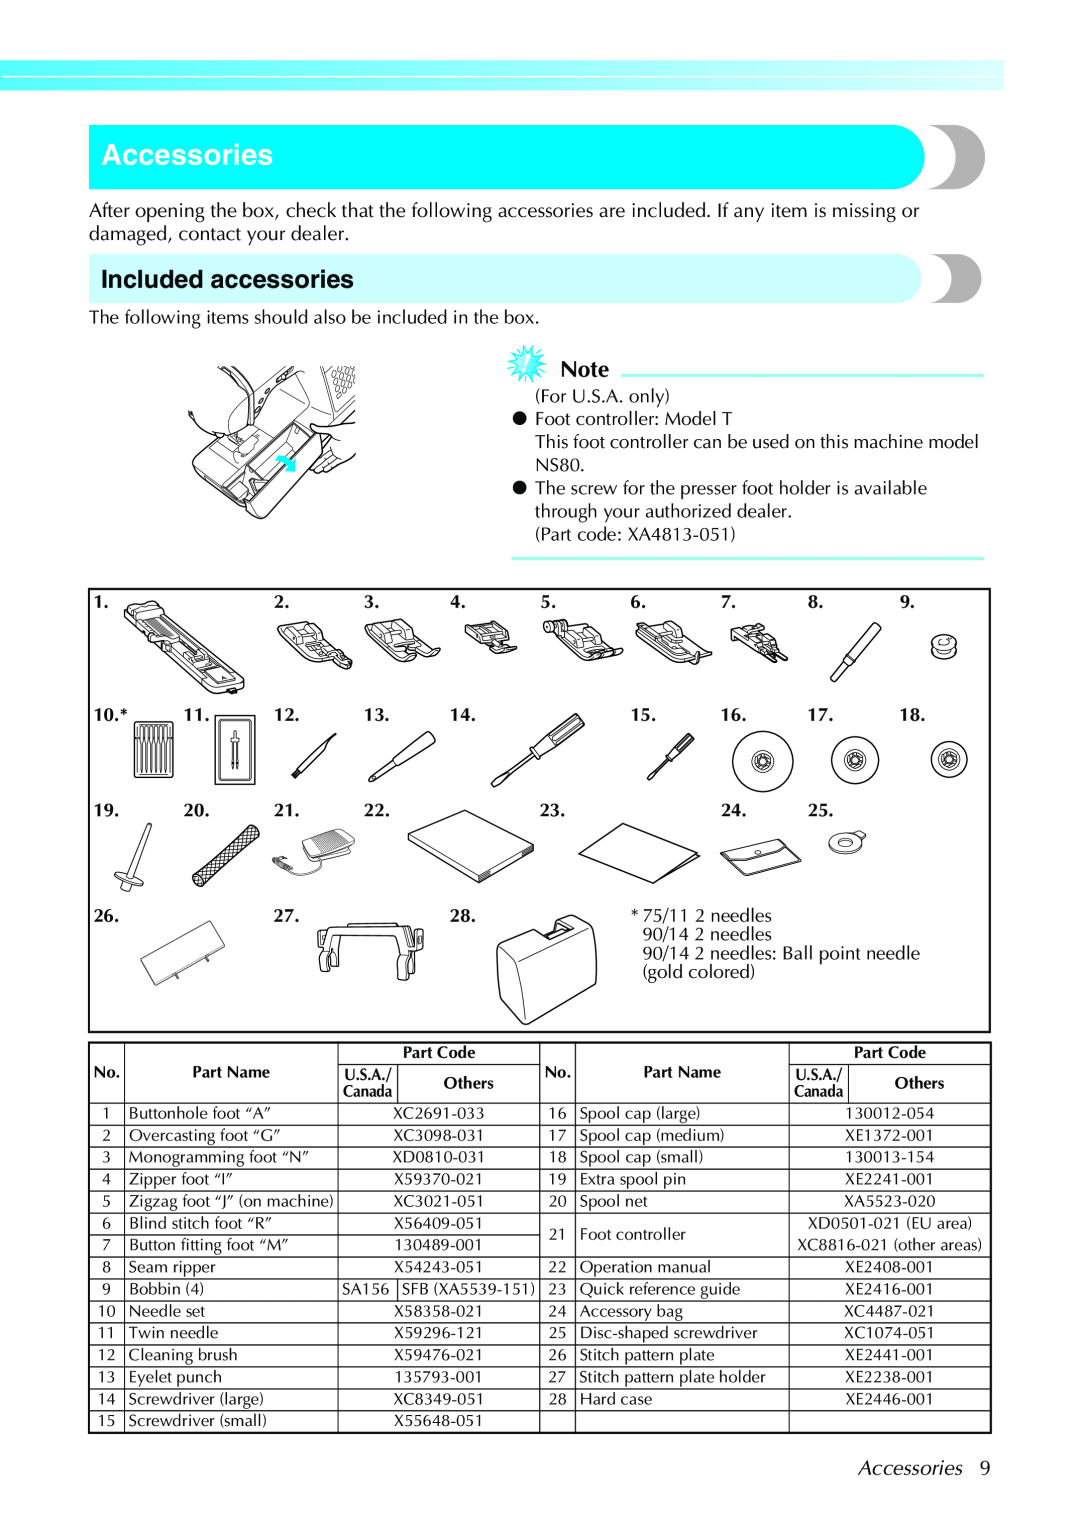 Brother Sewing Machines operation manual Accessories, Included accessories 